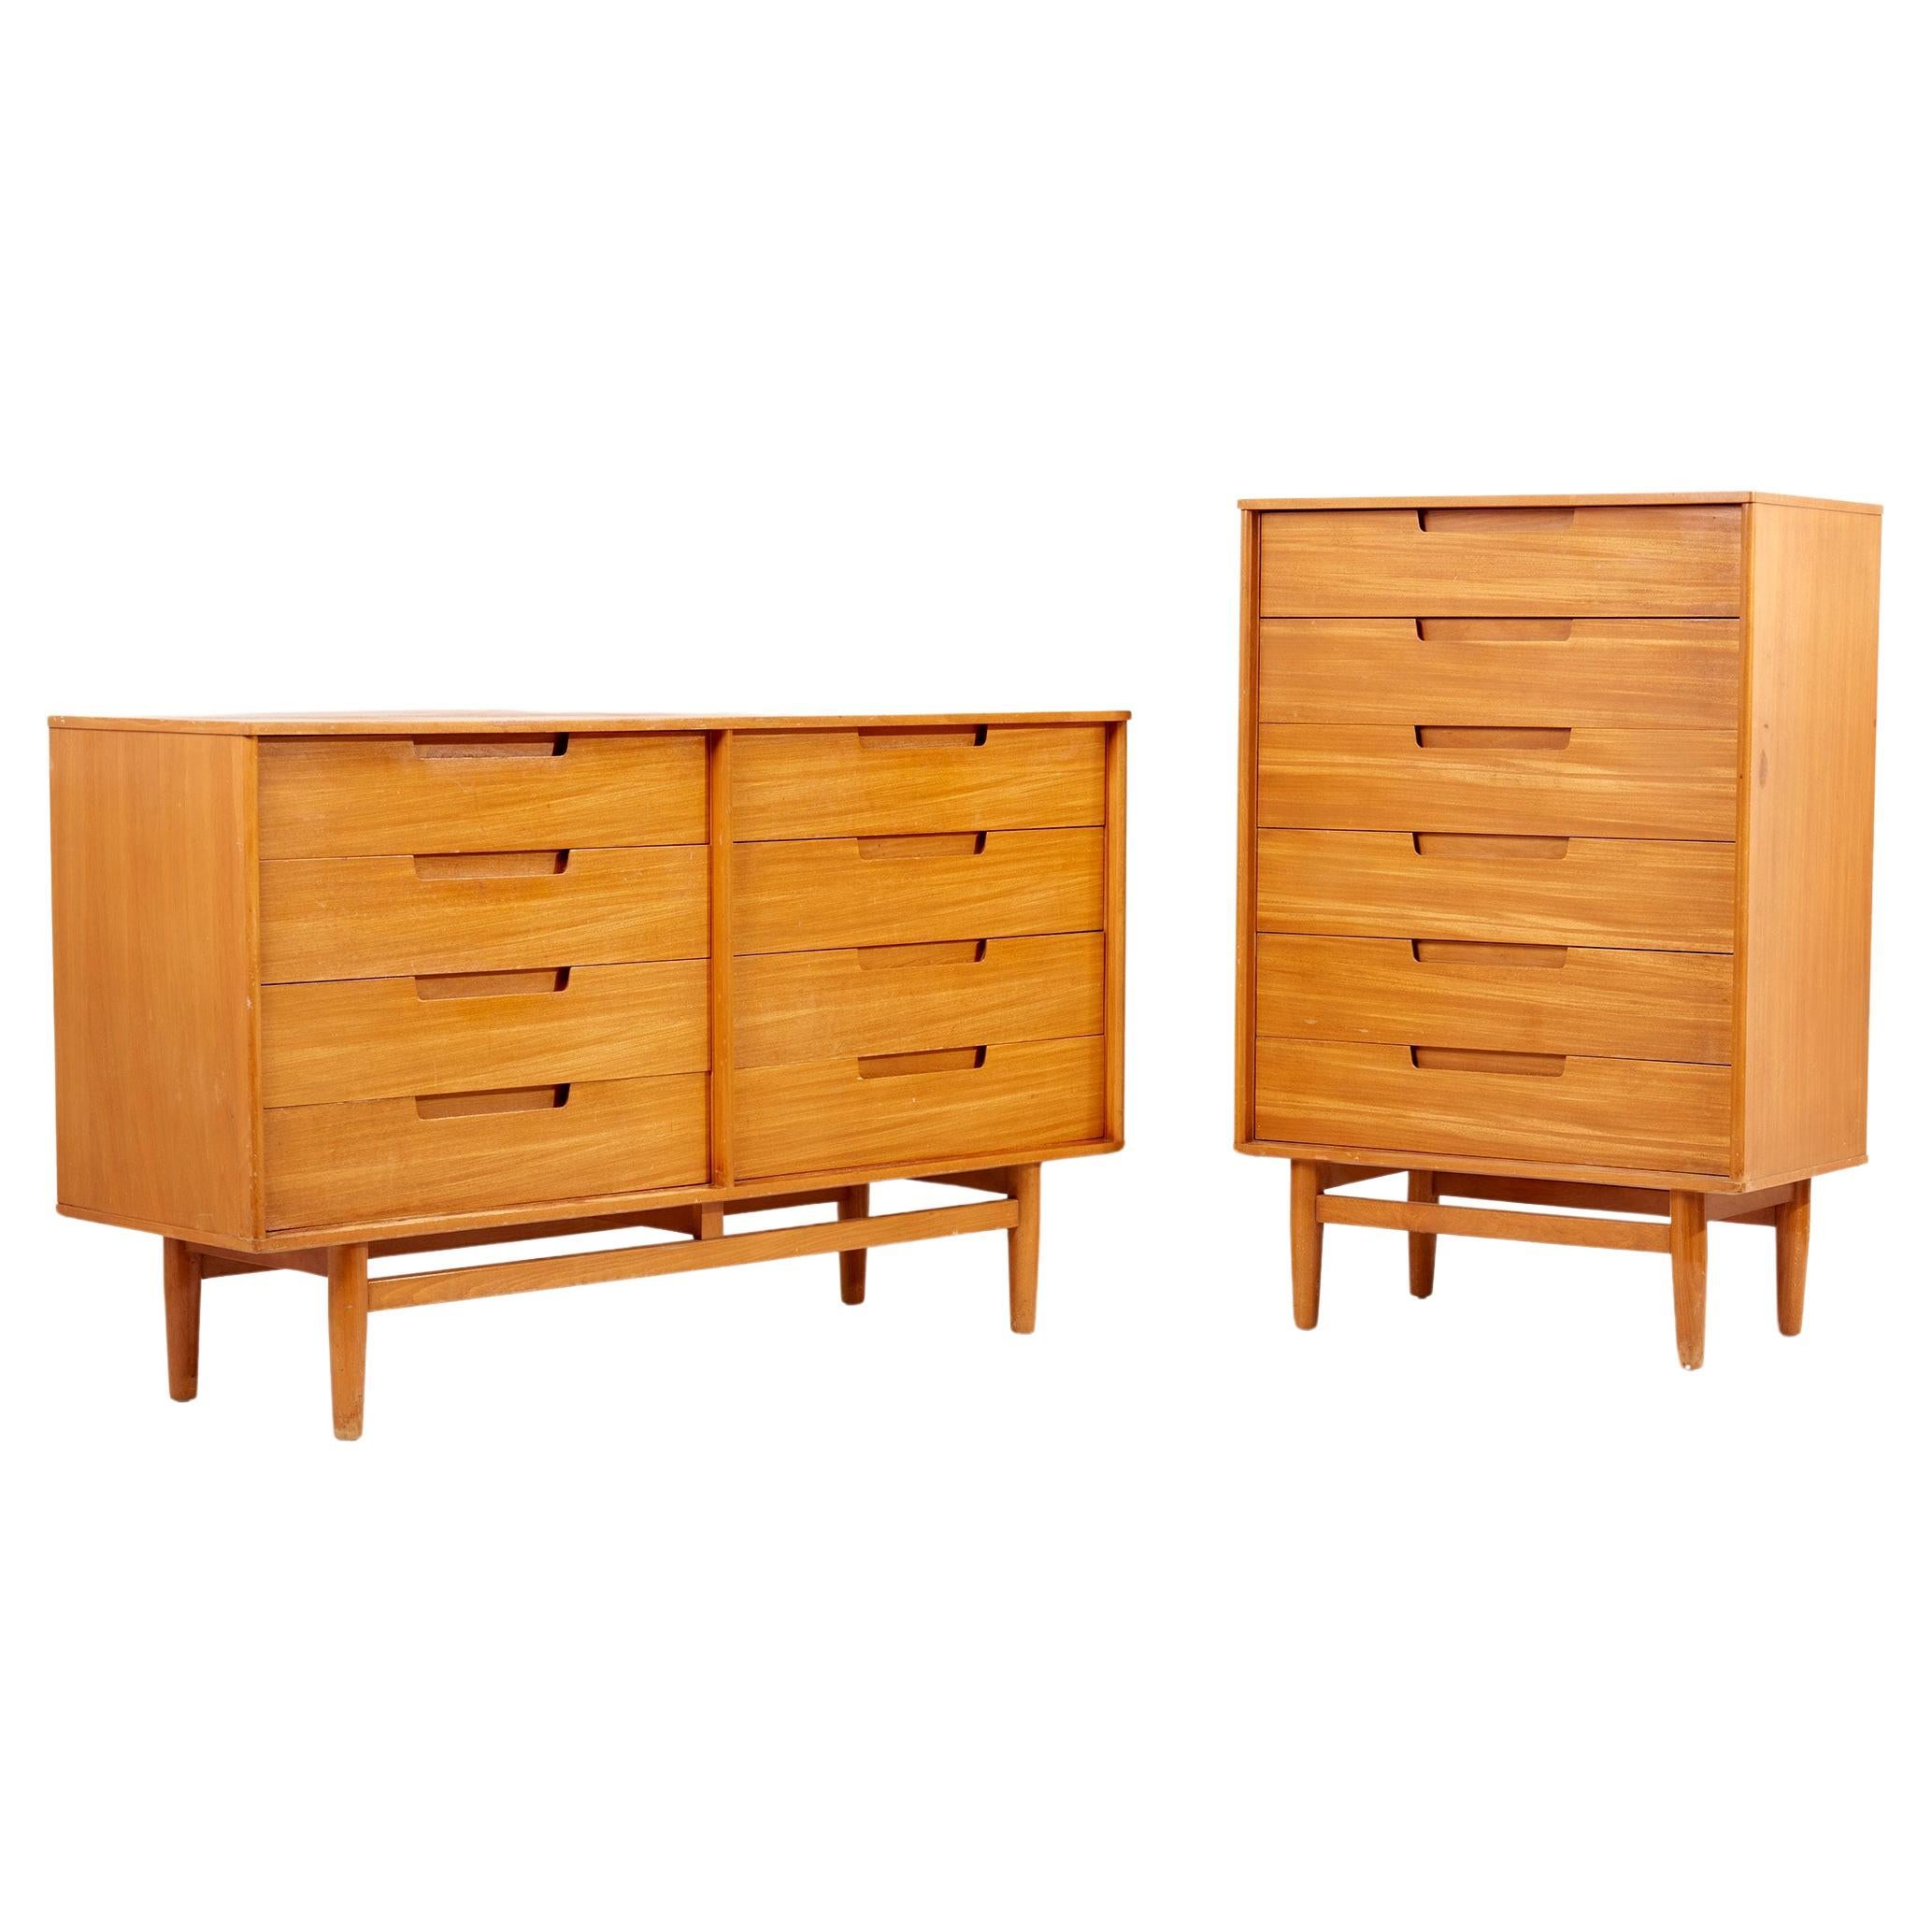 Matched pair of Milo Baughman Dressers for Drexel USA - 1950s